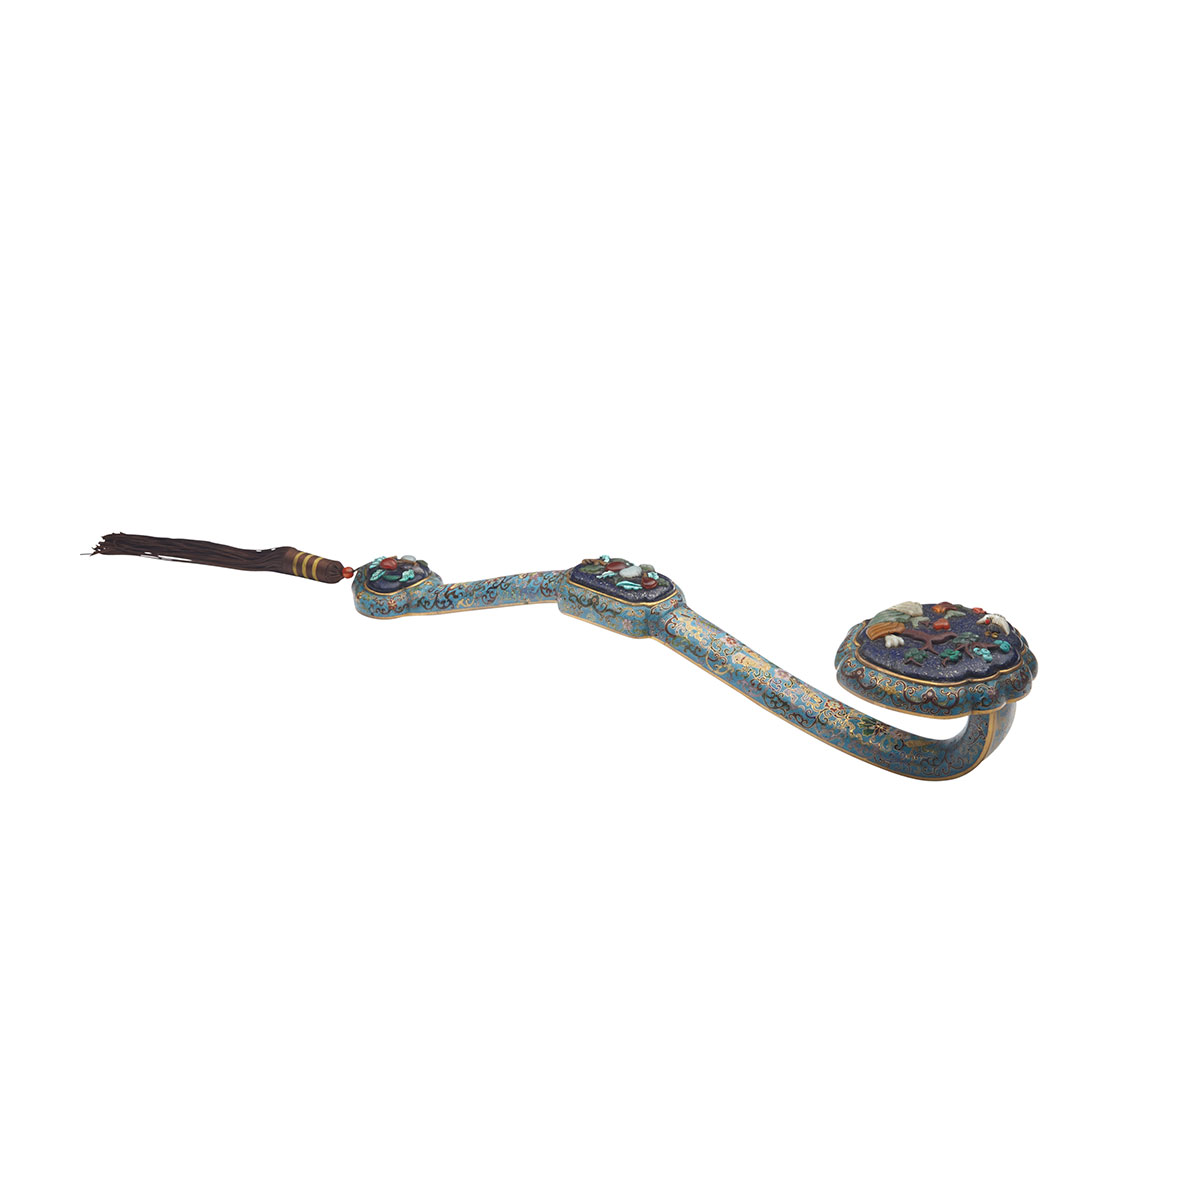 Cloisonné Enamel and Hardstone Inlay Ruyi Sceptre, Late Qing Dynasty